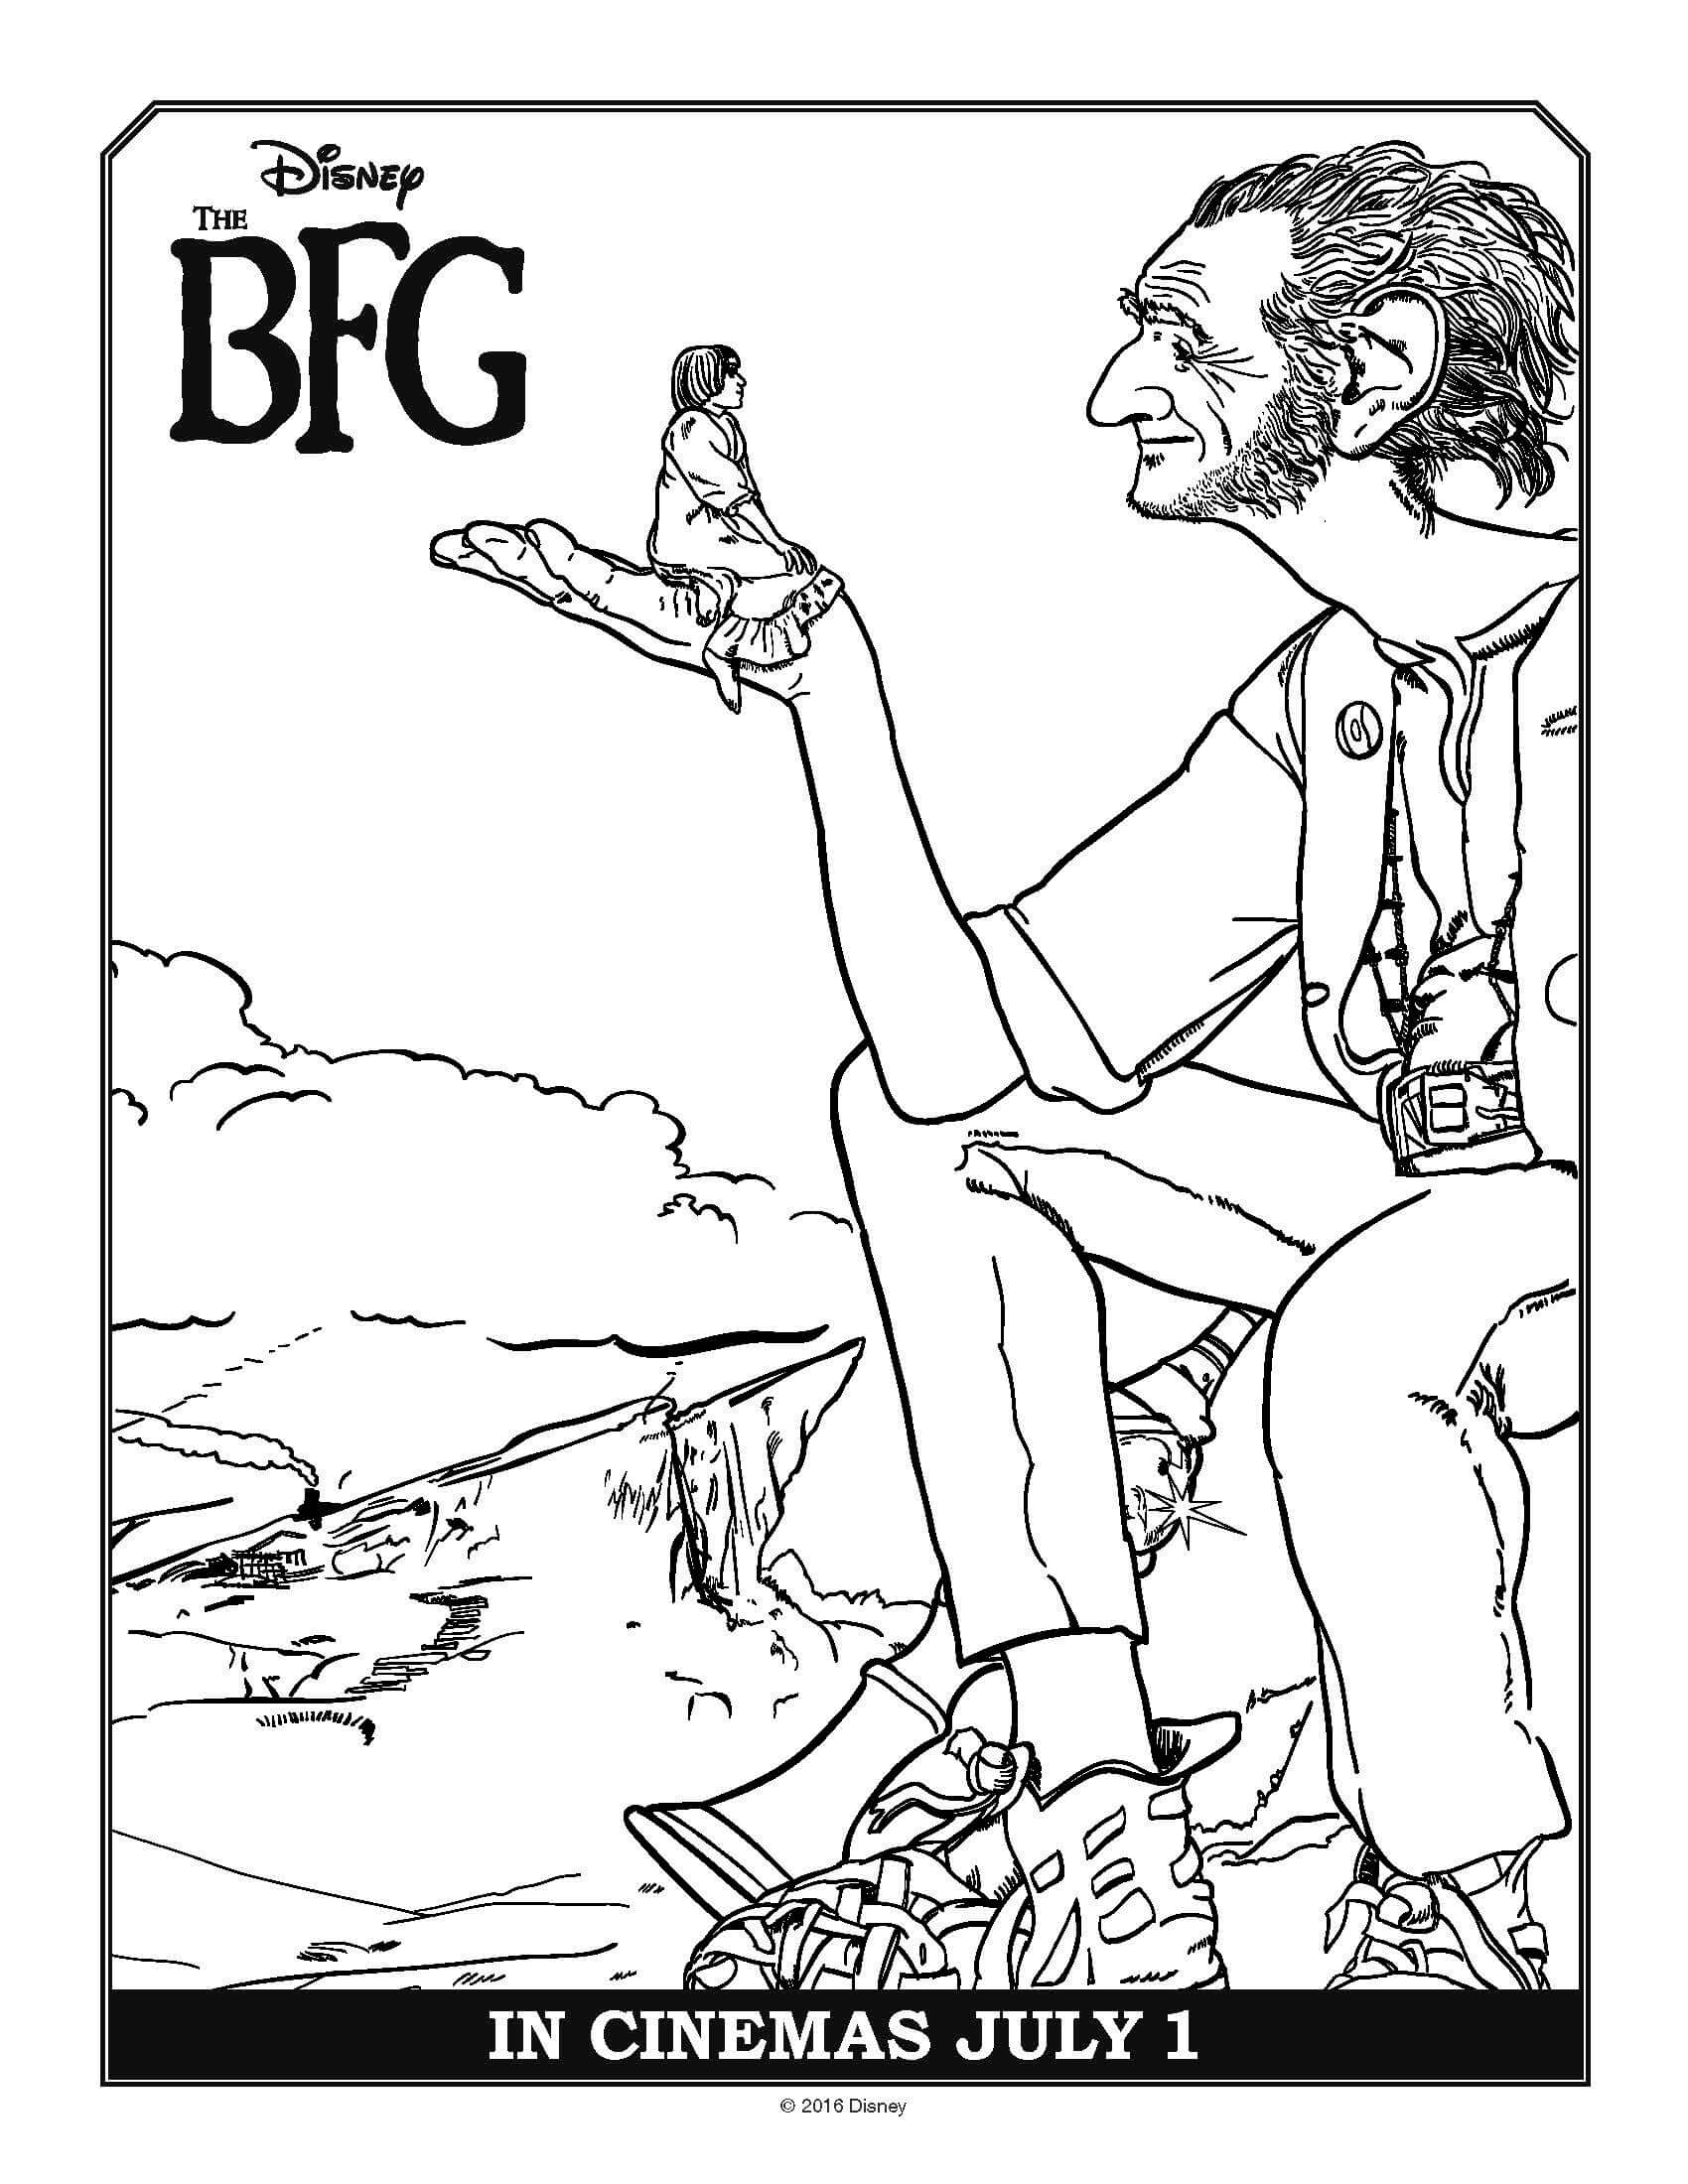 The BFG Coloring pages and free printables